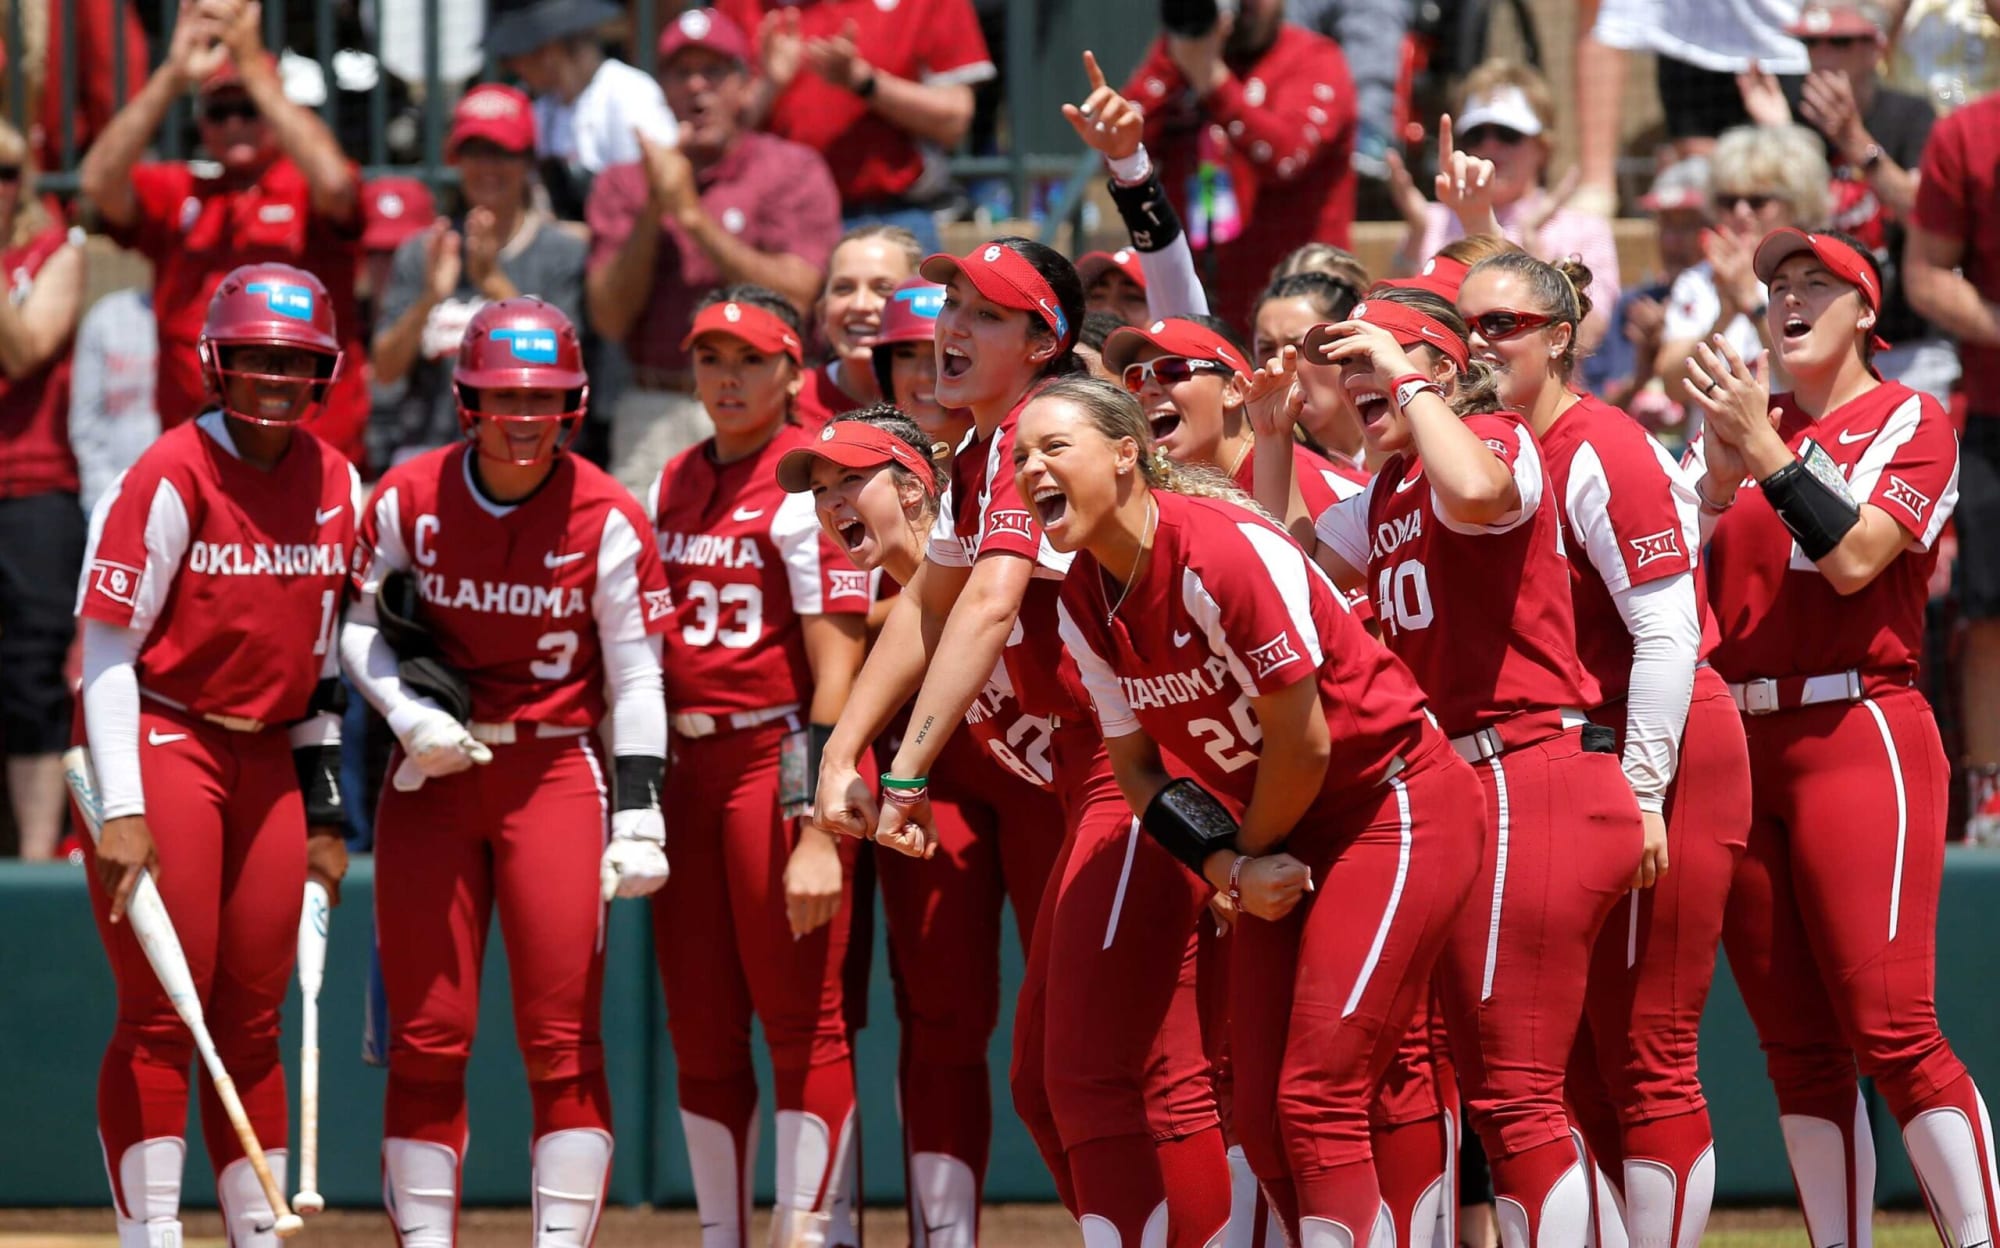 Oklahoma softball Sooners chasing multiple NCAA records, including GOAT